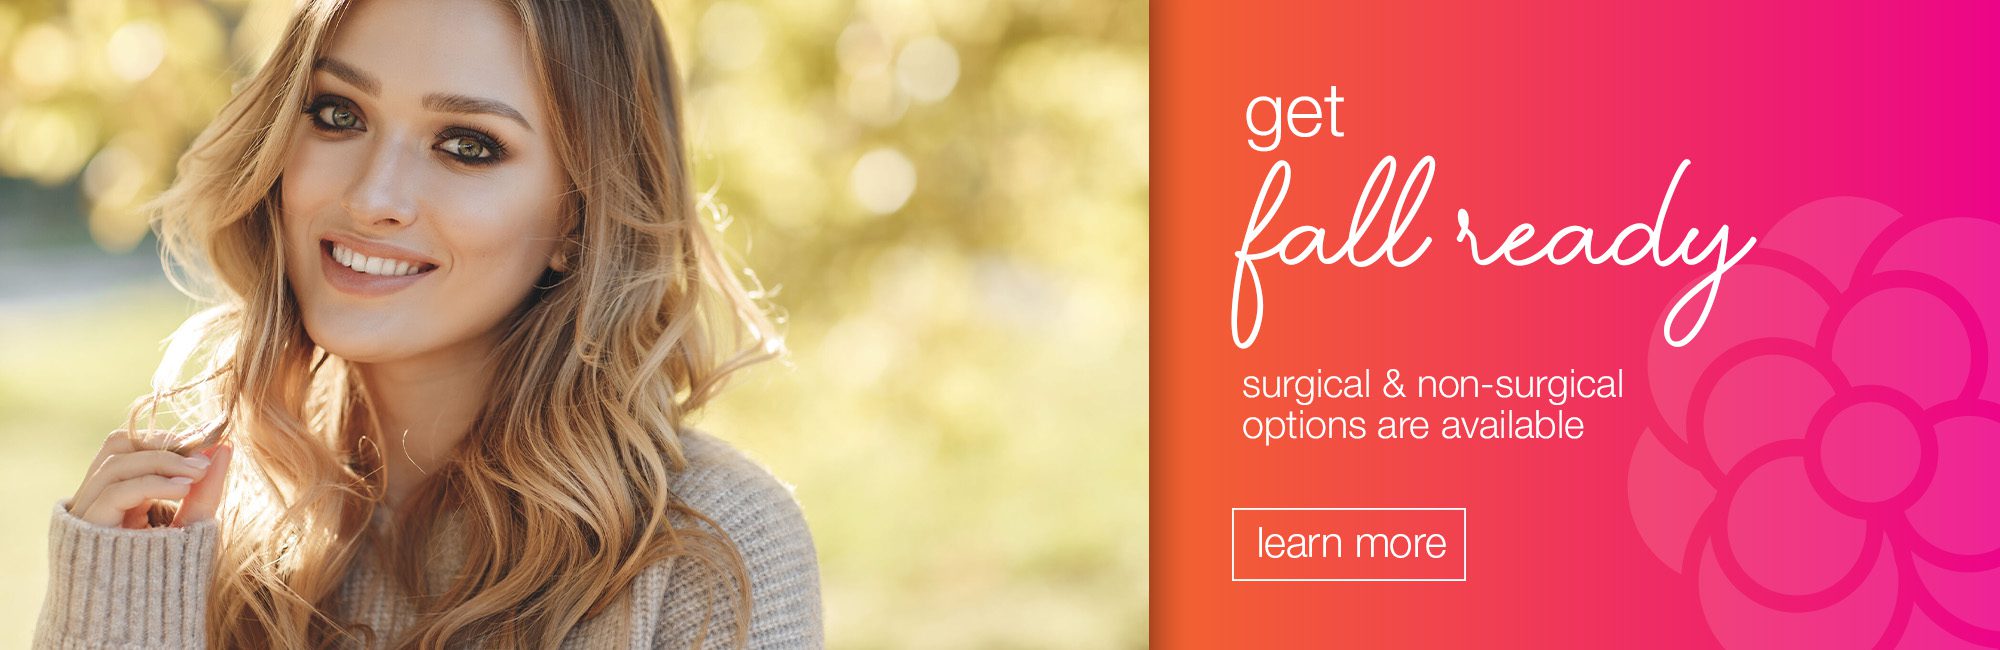 Get Fall Ready! Surgical and Non-surgical options are available.